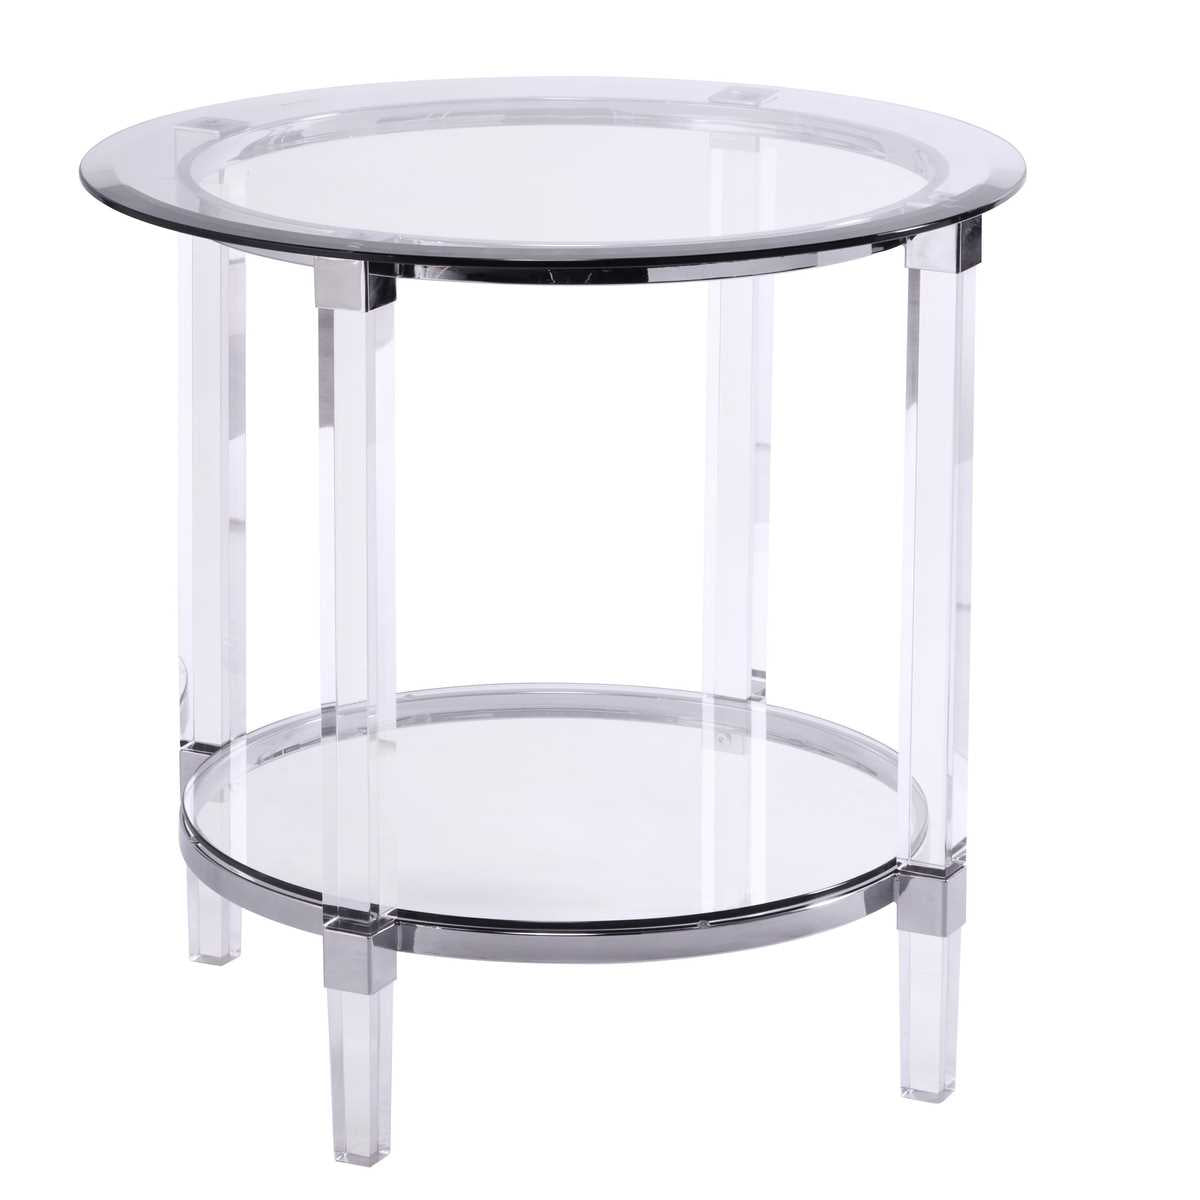 Lyrica Round Coffee Table Collection with Acrylic Legs 3656-01